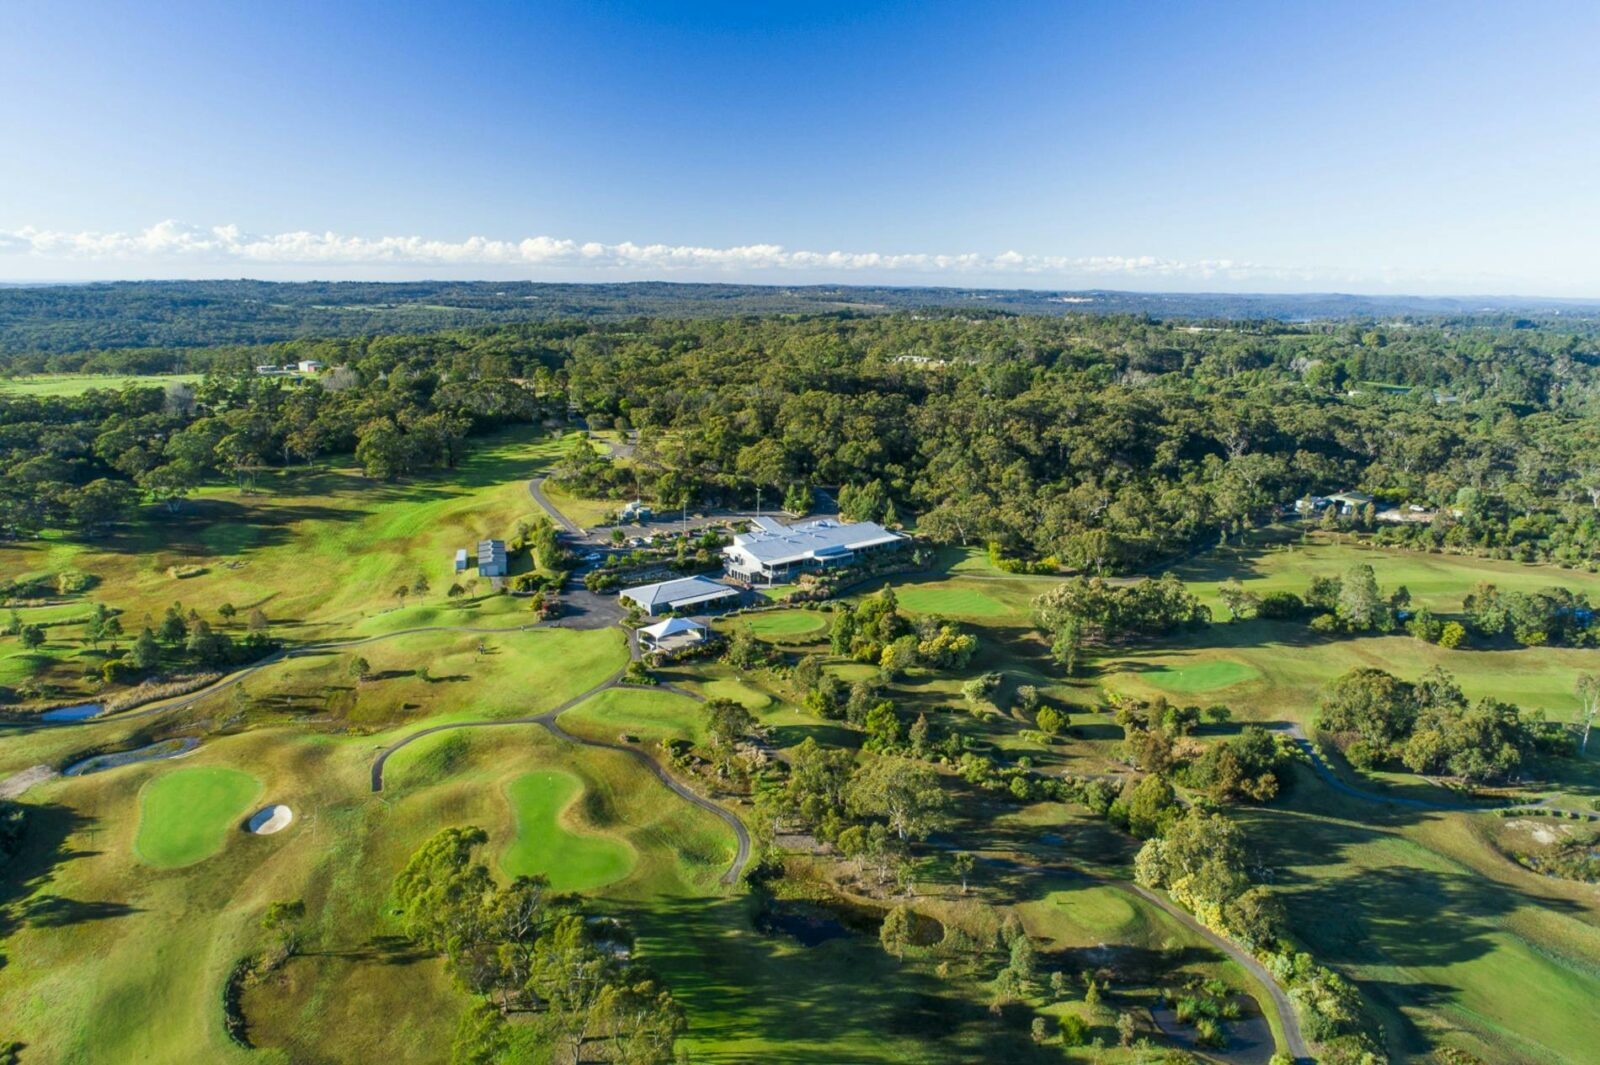 Birdseye View of The Springs Golf course and Restaurant